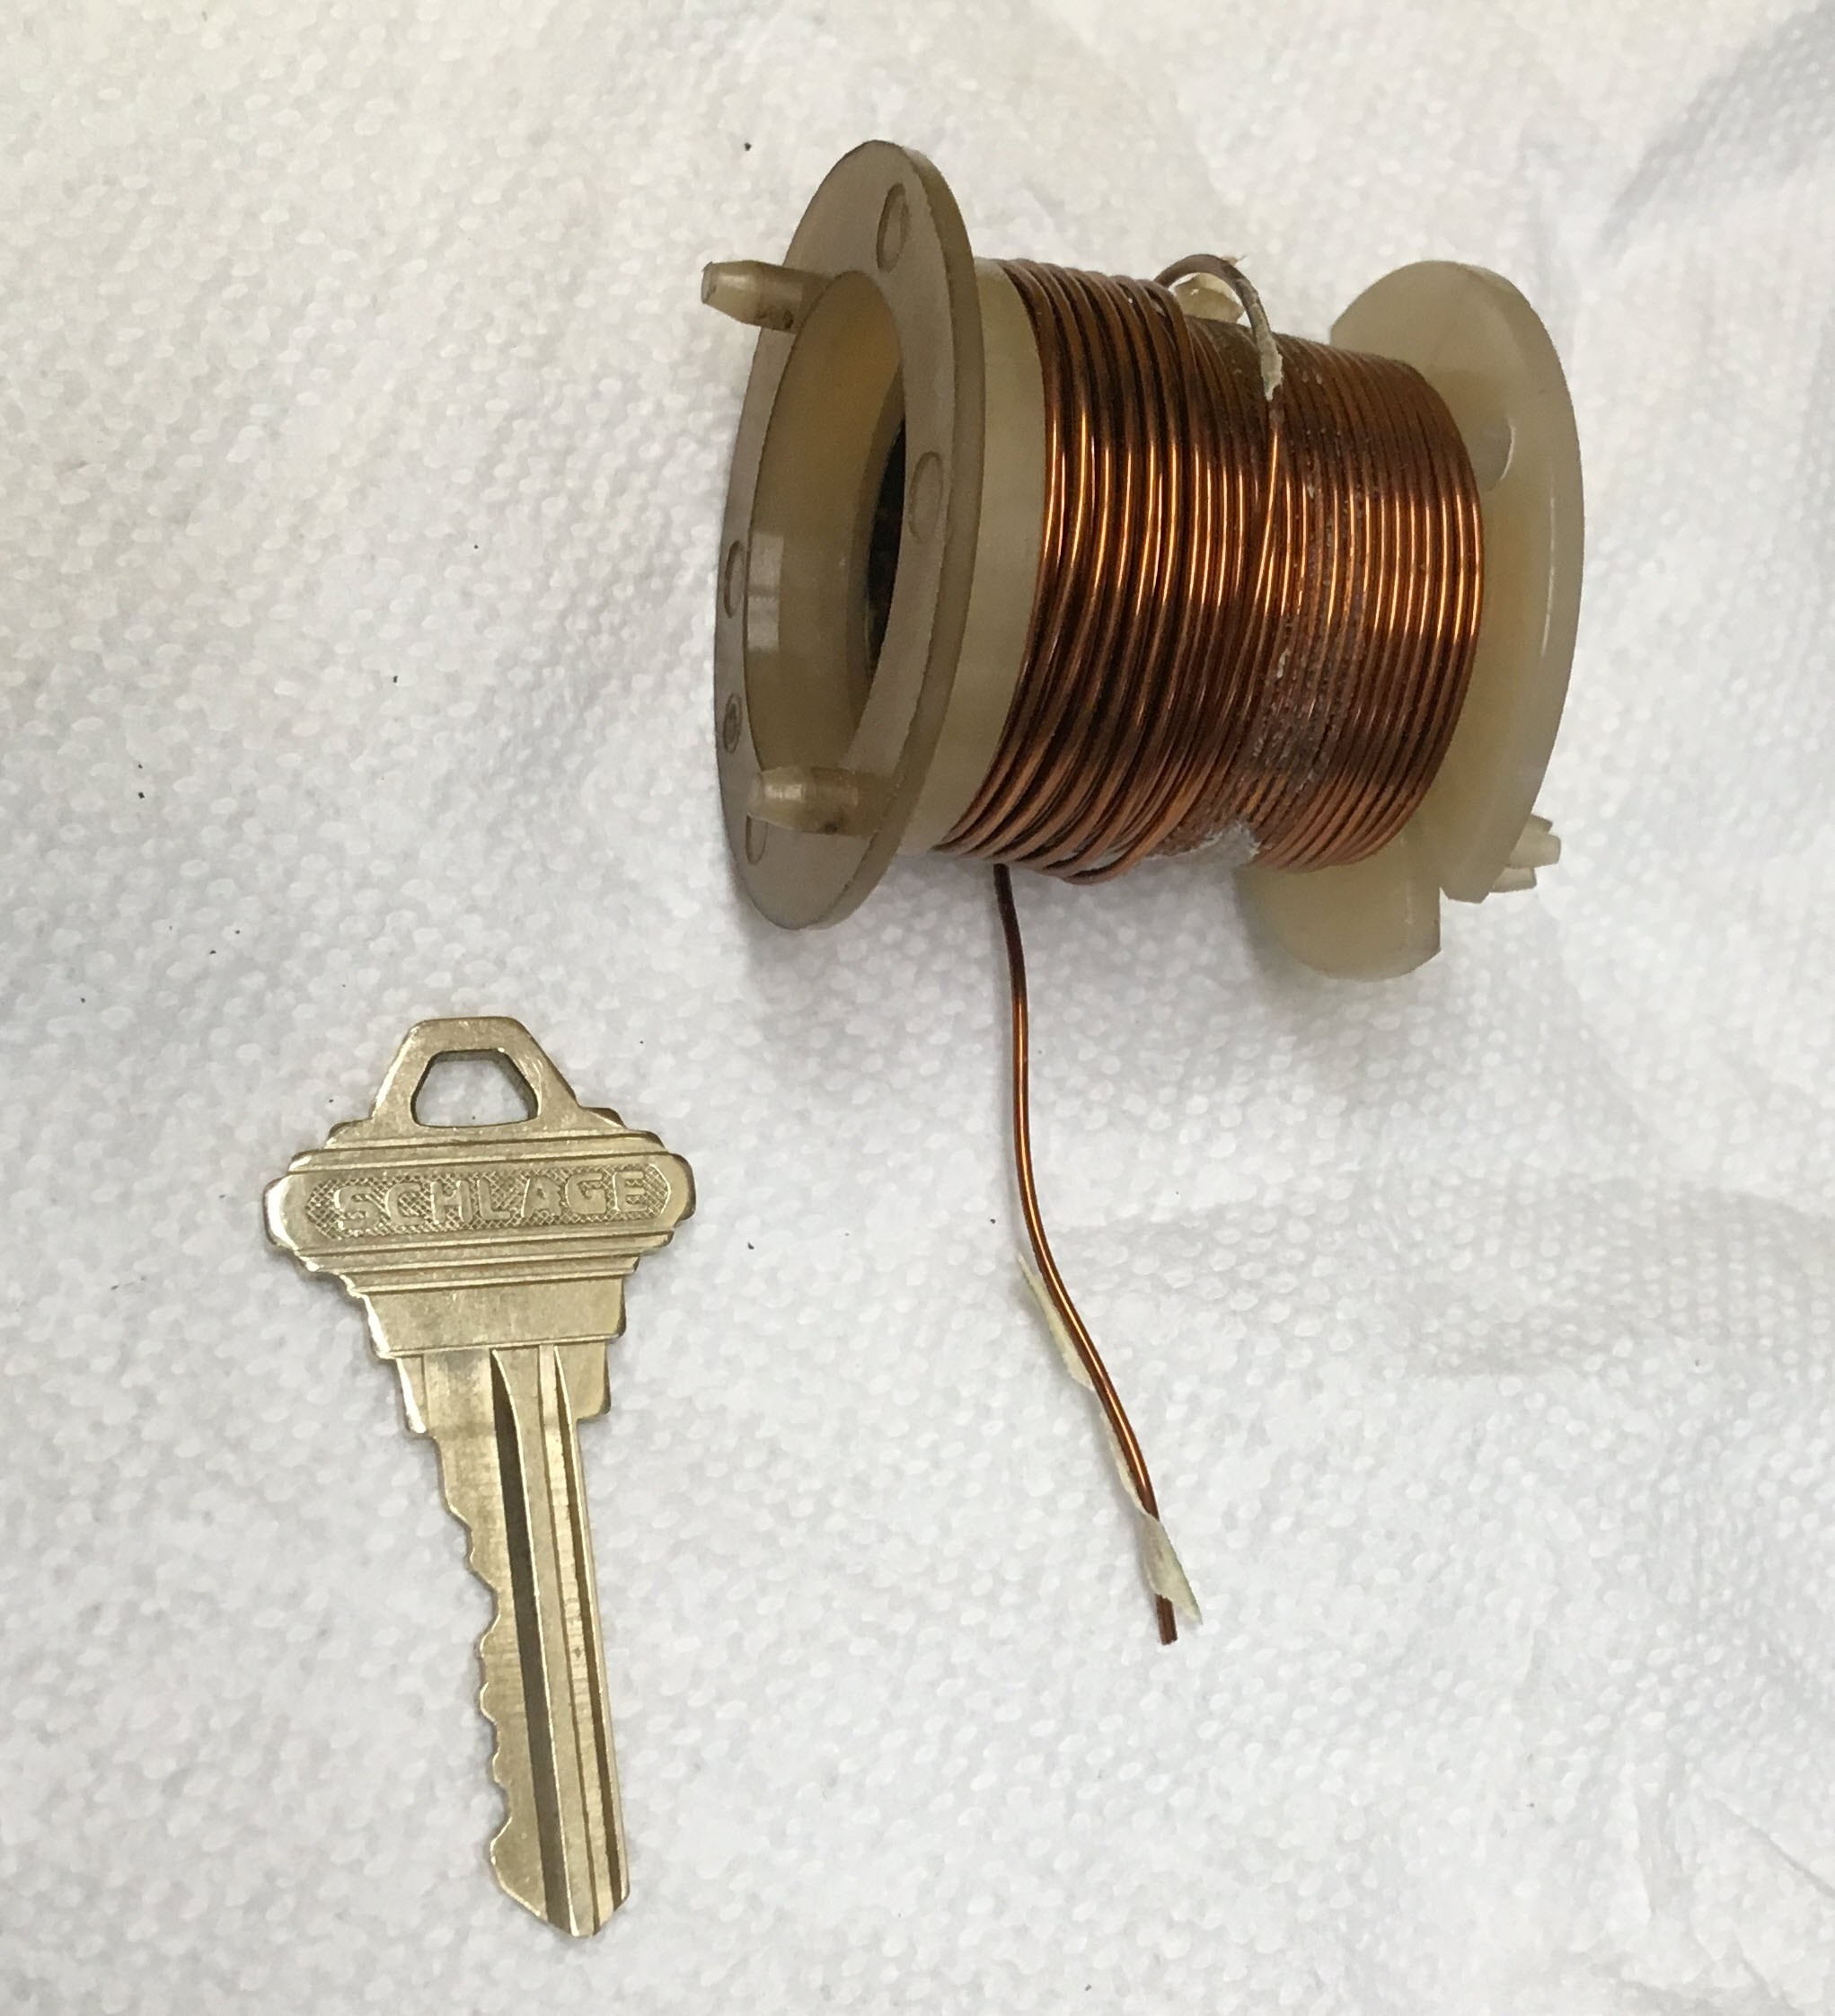 Spool of copper wire (Nissan LD28 solenoid).